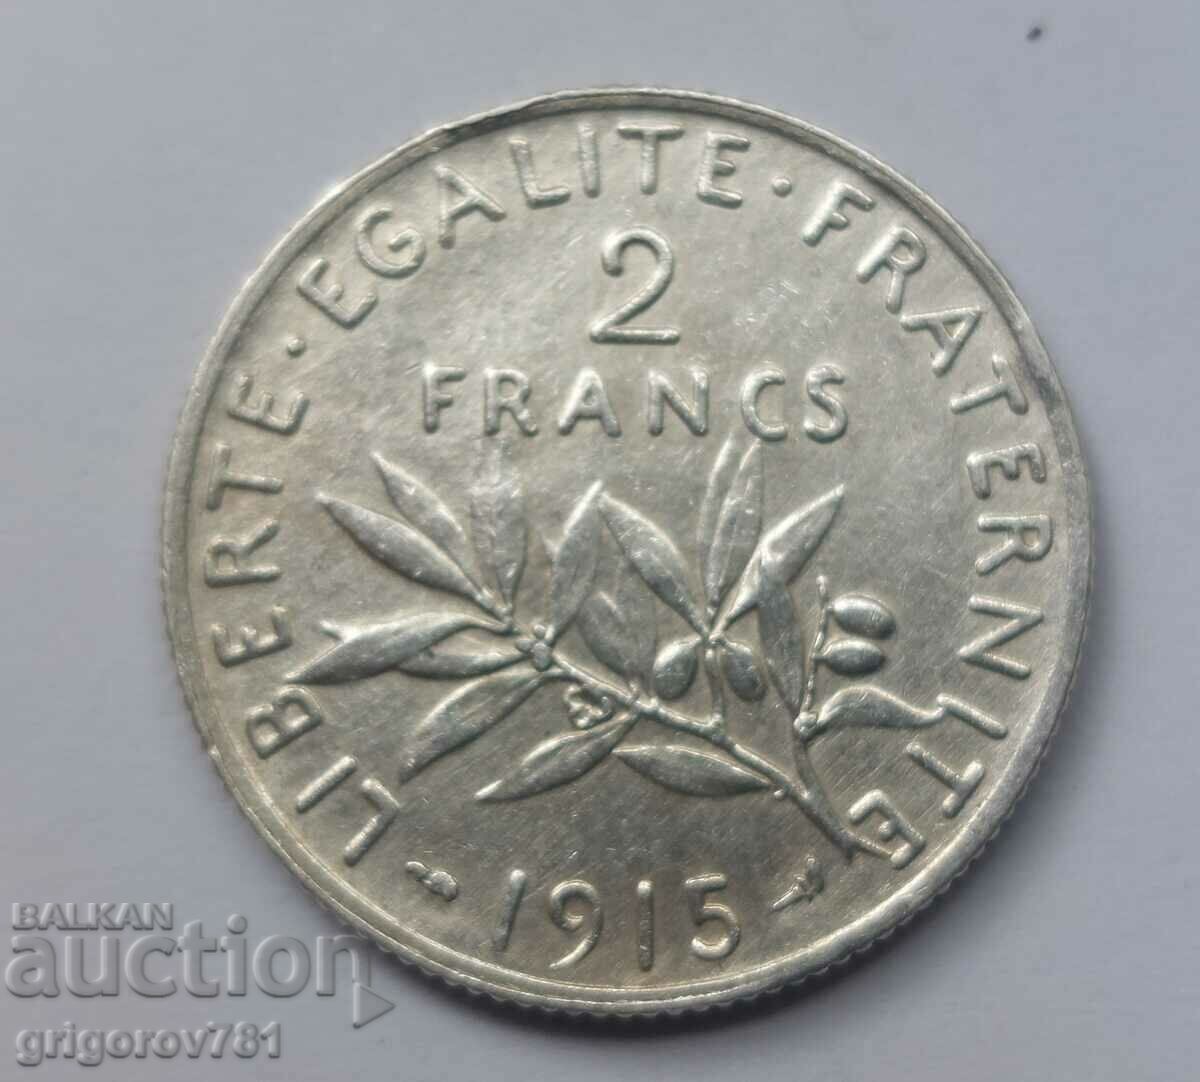 2 Francs Silver France 1915 - Silver Coin #62